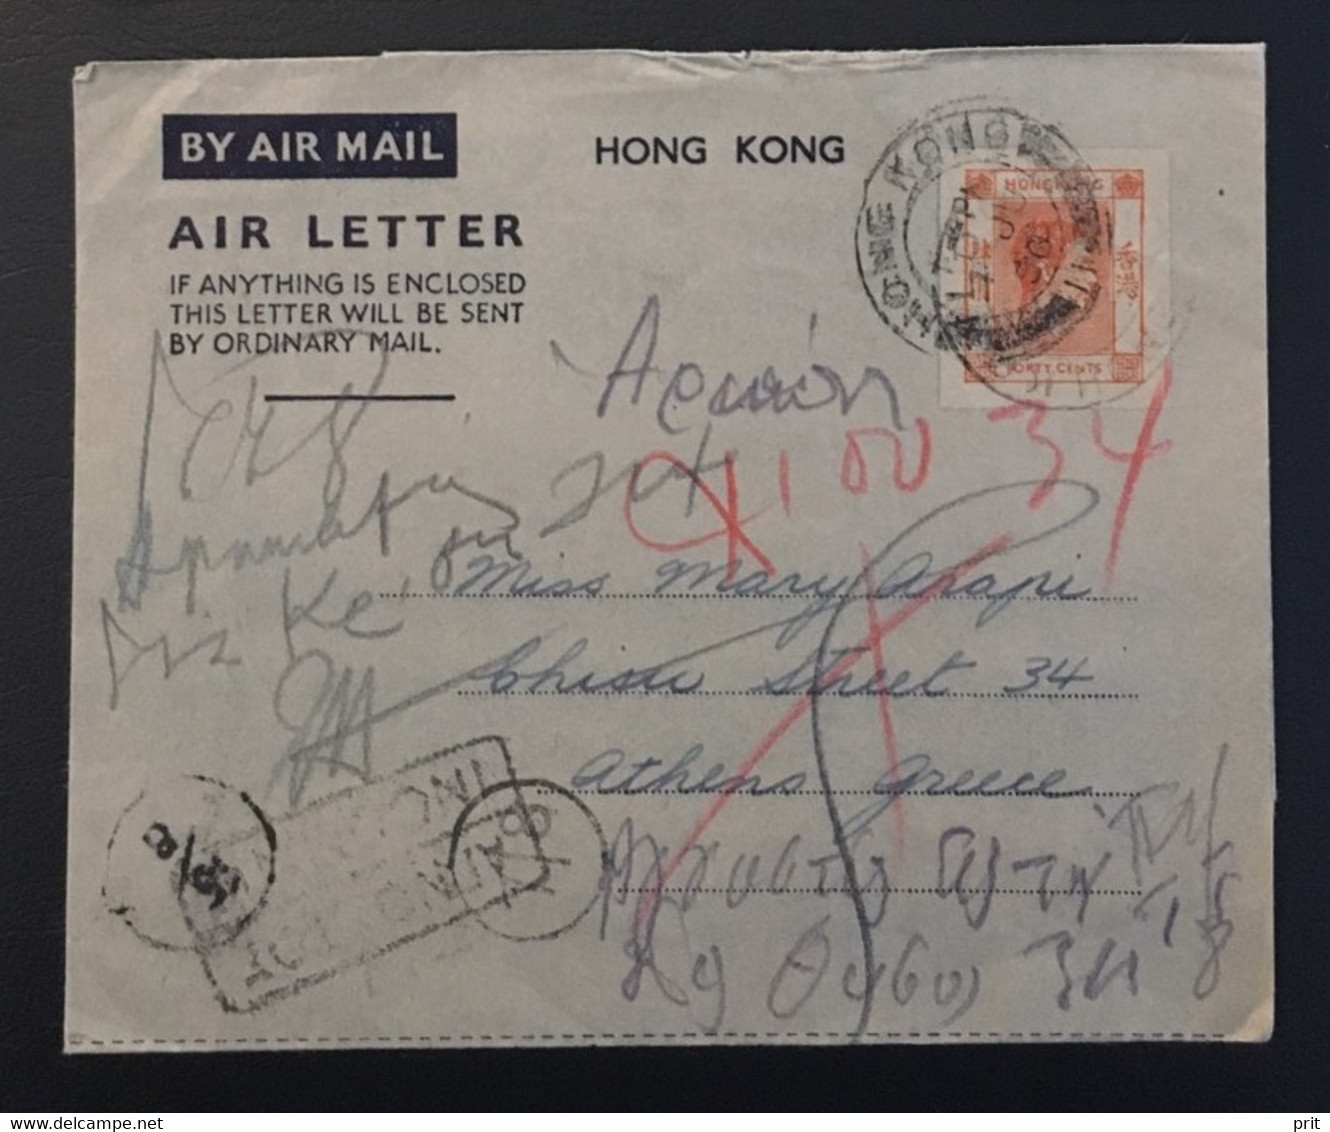 Hong Kong 1949/1950 2 Postal Stationery/Air letters to Greece. Nice cancels